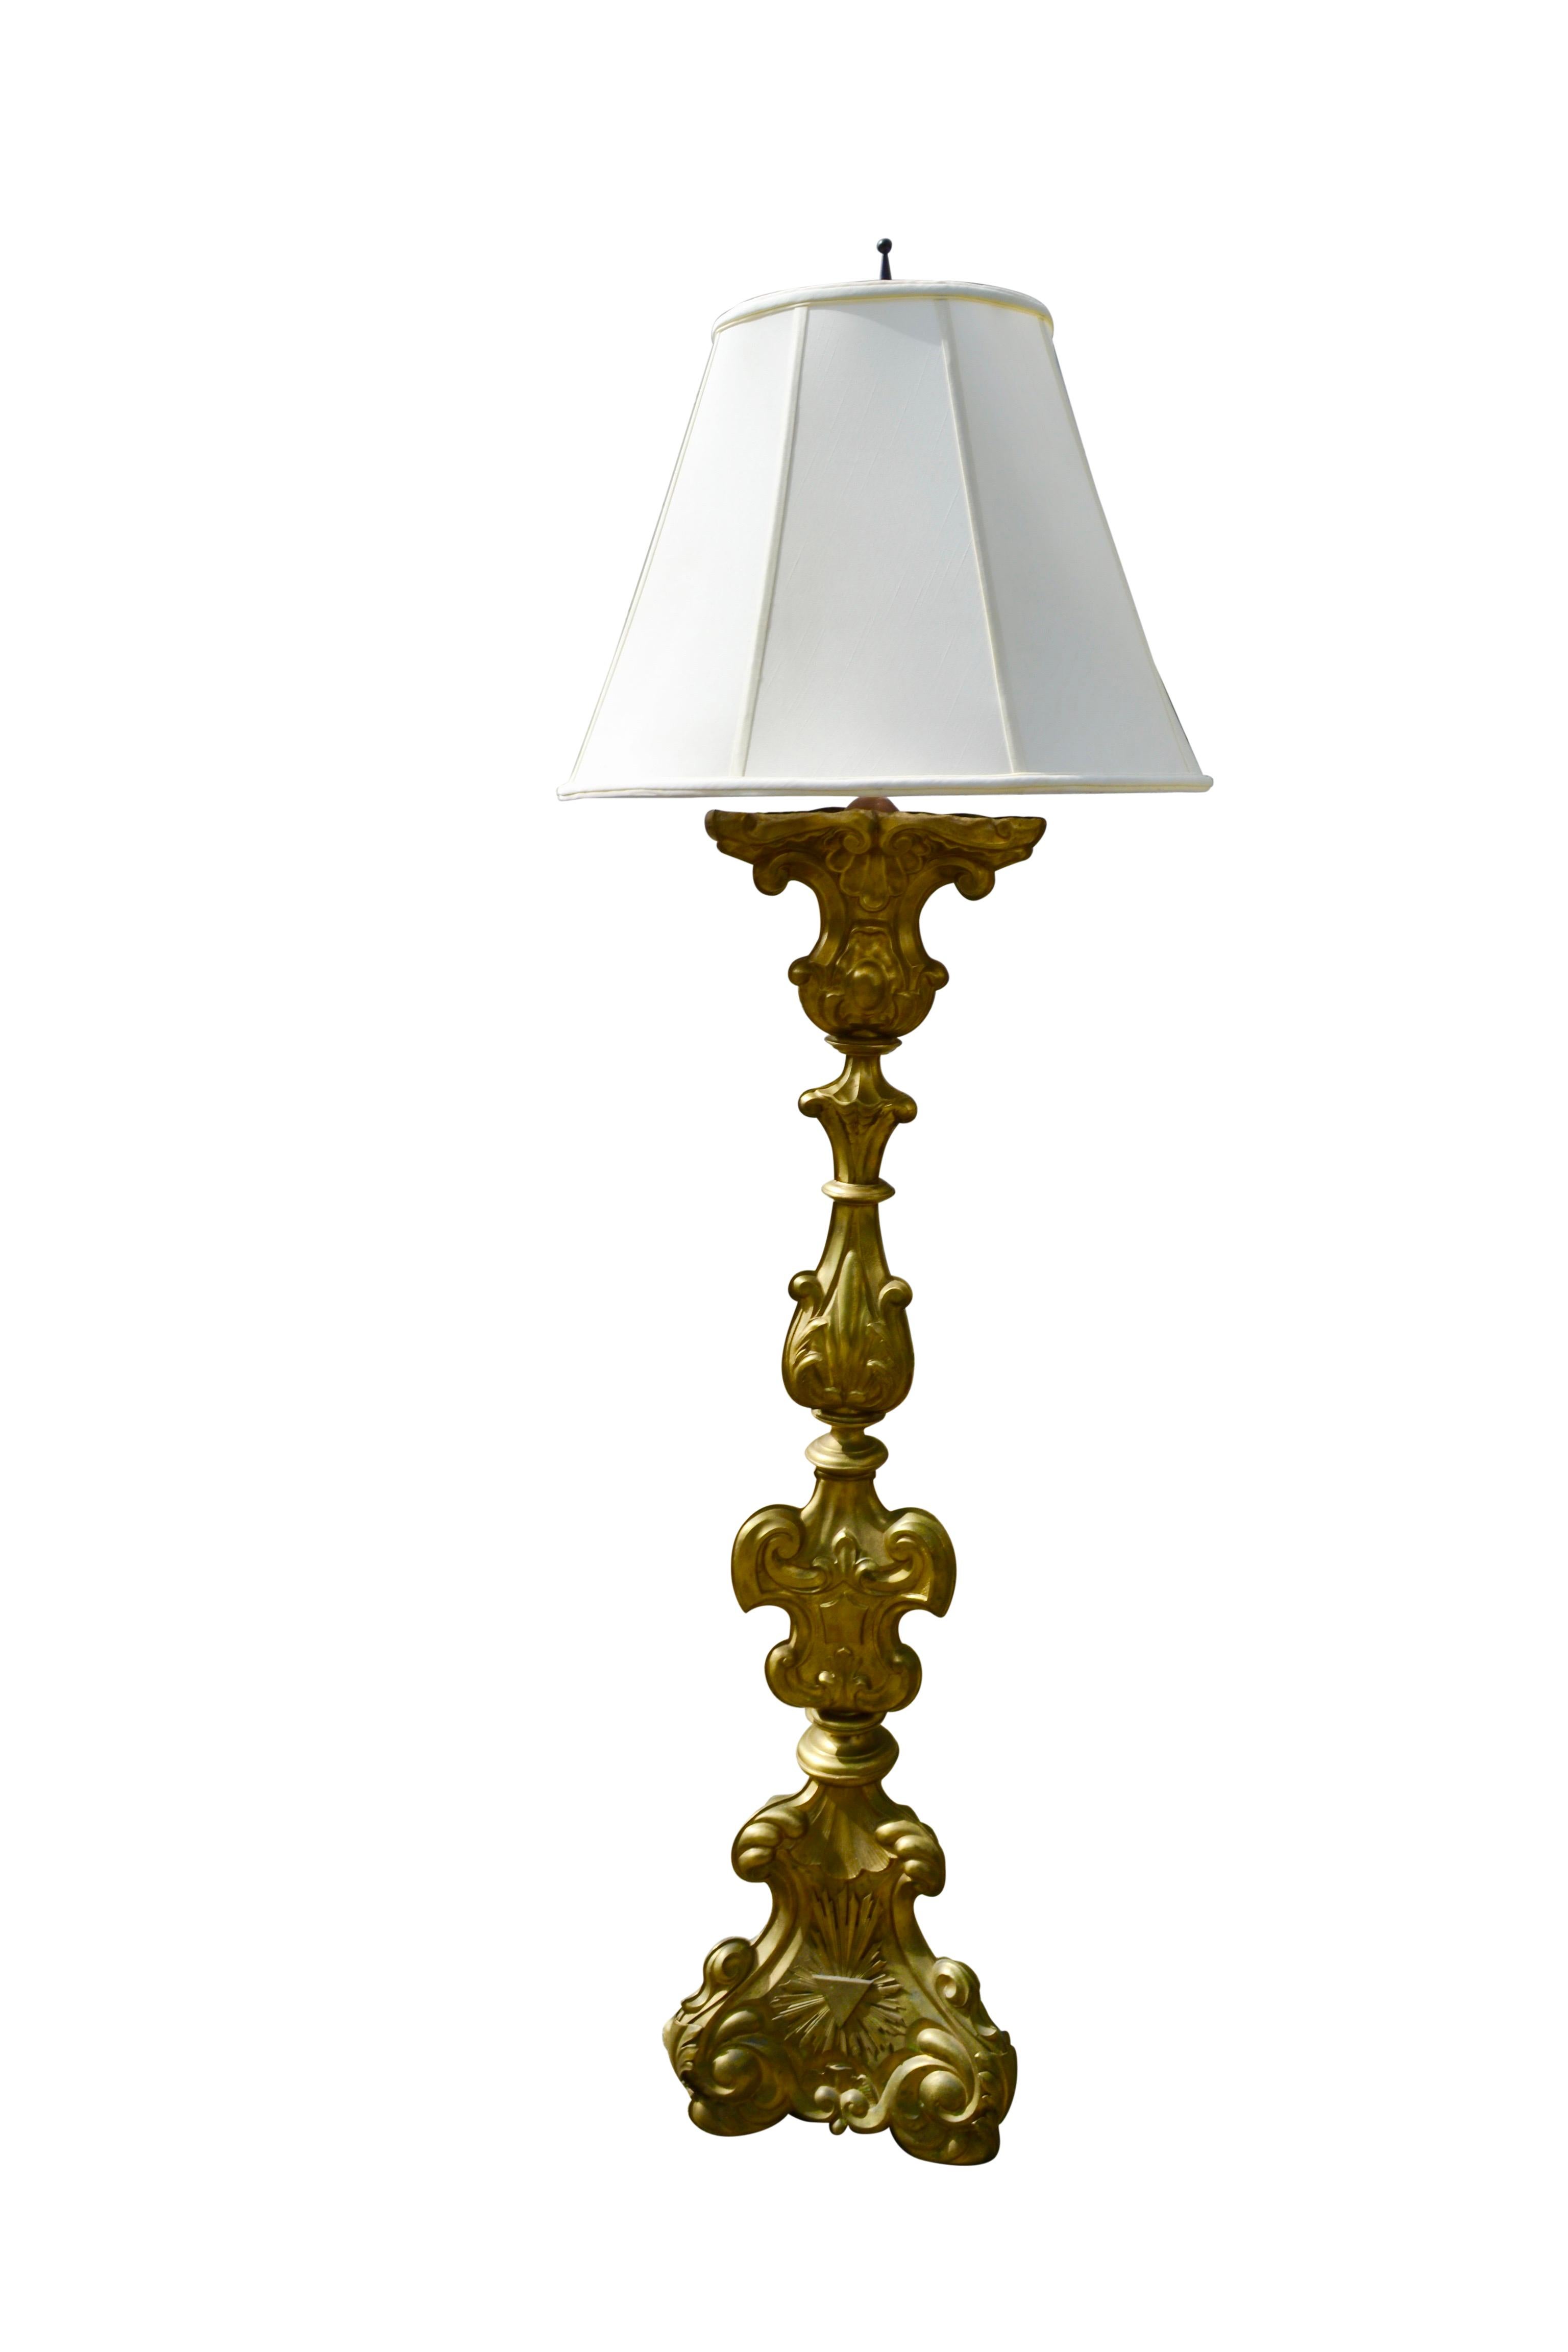 A mid-19 century French church altar candlestick made of wood clad with silvered metal in the Baroque style that has been converted into a floor lamp.